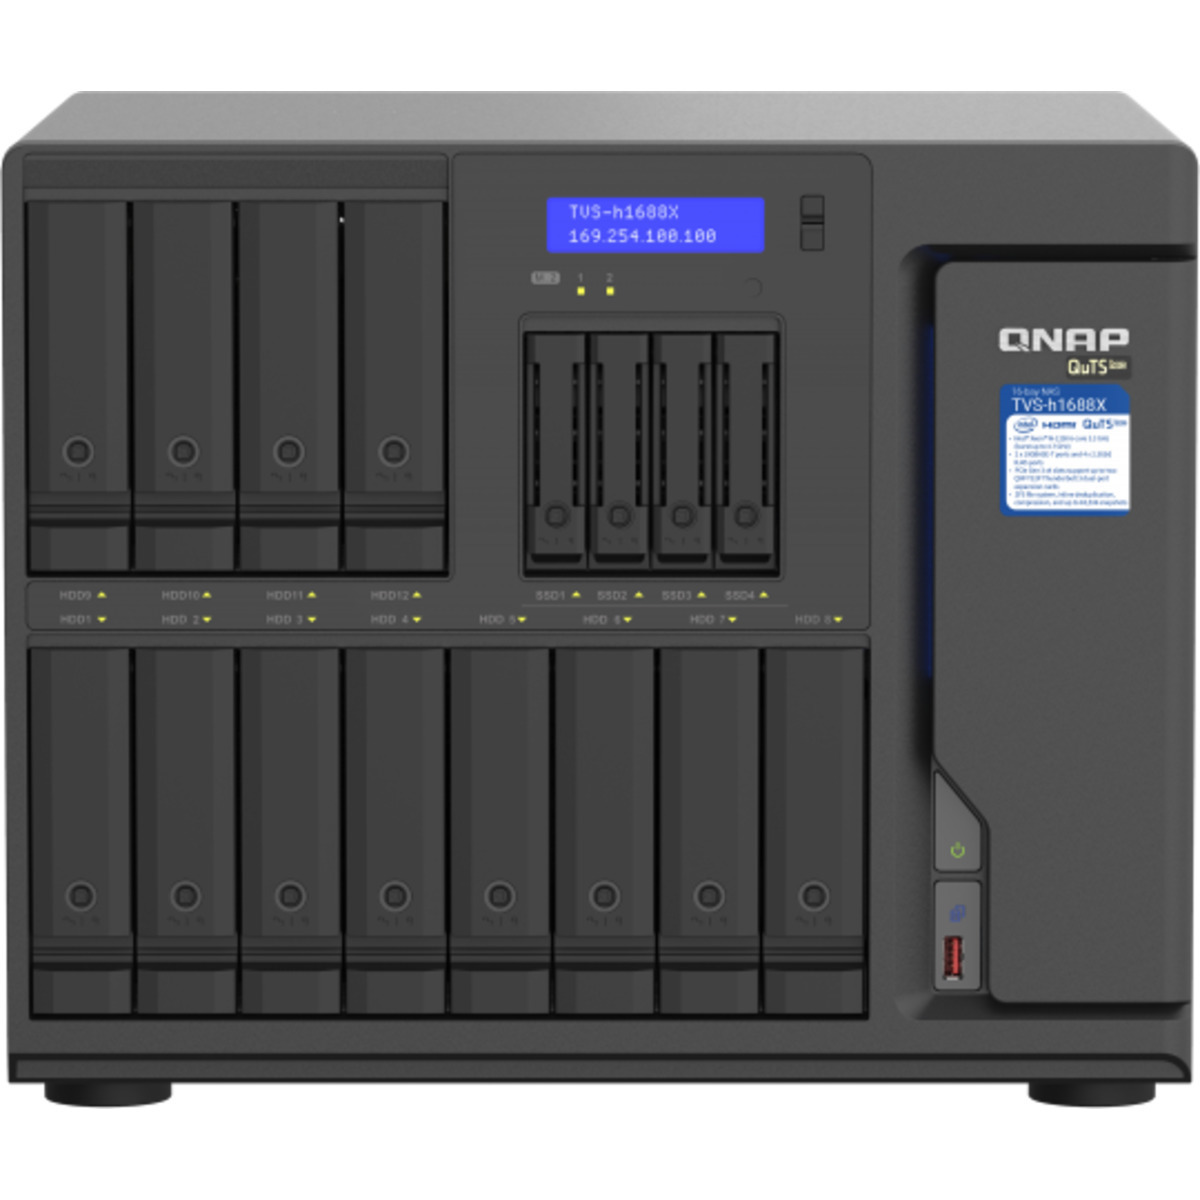 QNAP TVS-h1688X QuTS hero NAS 154tb 12+4-Bay Desktop Multimedia / Power User / Business NAS - Network Attached Storage Device 11x14tb Seagate IronWolf Pro ST14000NT001 3.5 7200rpm SATA 6Gb/s HDD NAS Class Drives Installed - Burn-In Tested TVS-h1688X QuTS hero NAS